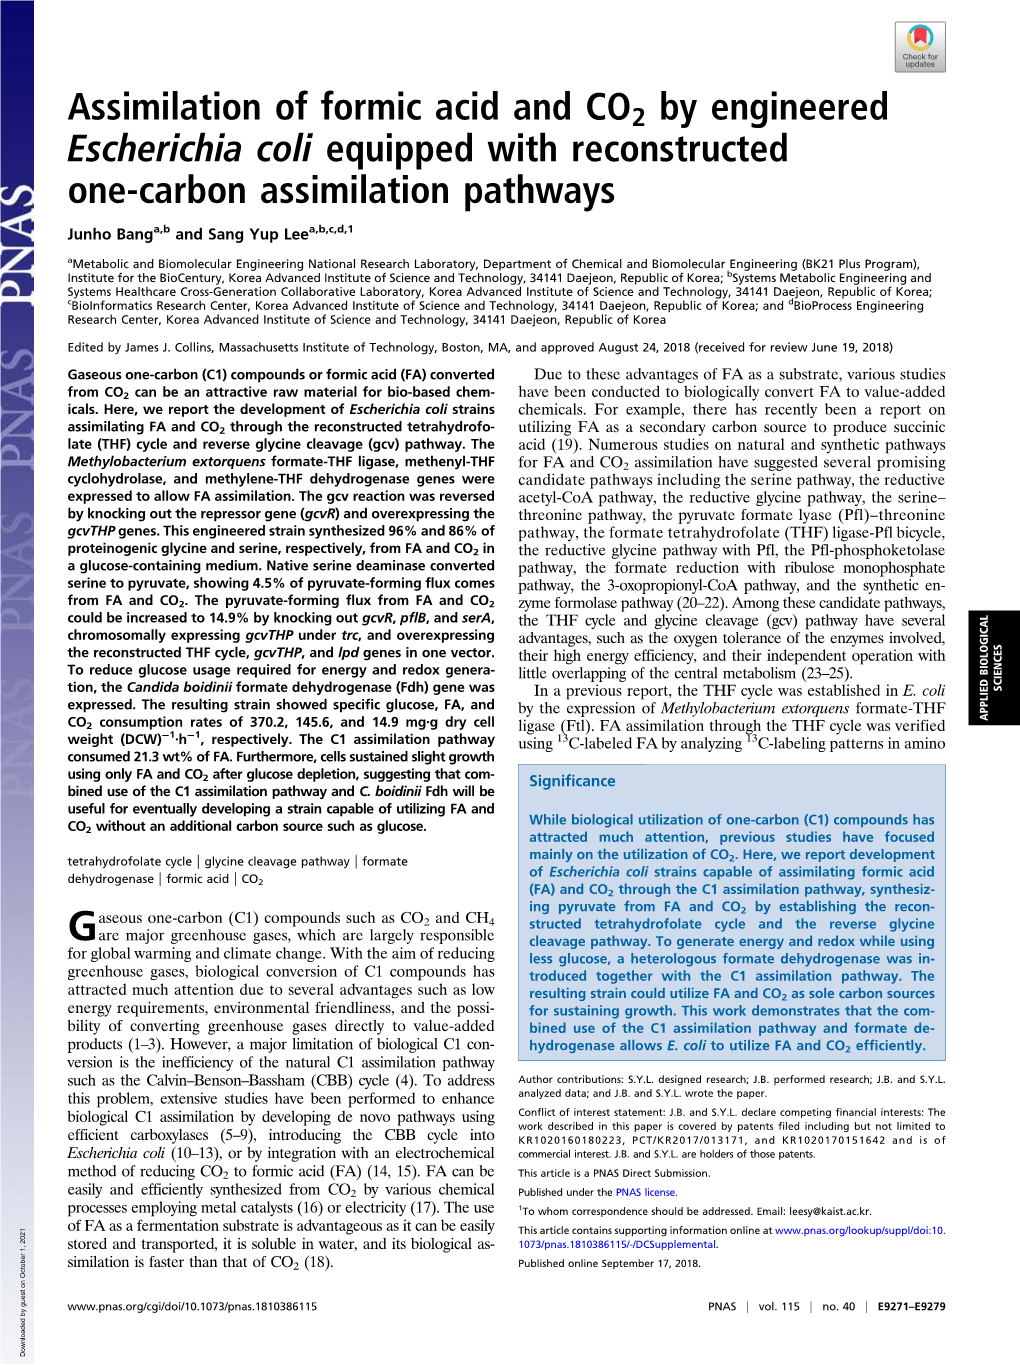 Assimilation of Formic Acid and CO2 by Engineered Escherichia Coli Equipped with Reconstructed One-Carbon Assimilation Pathways